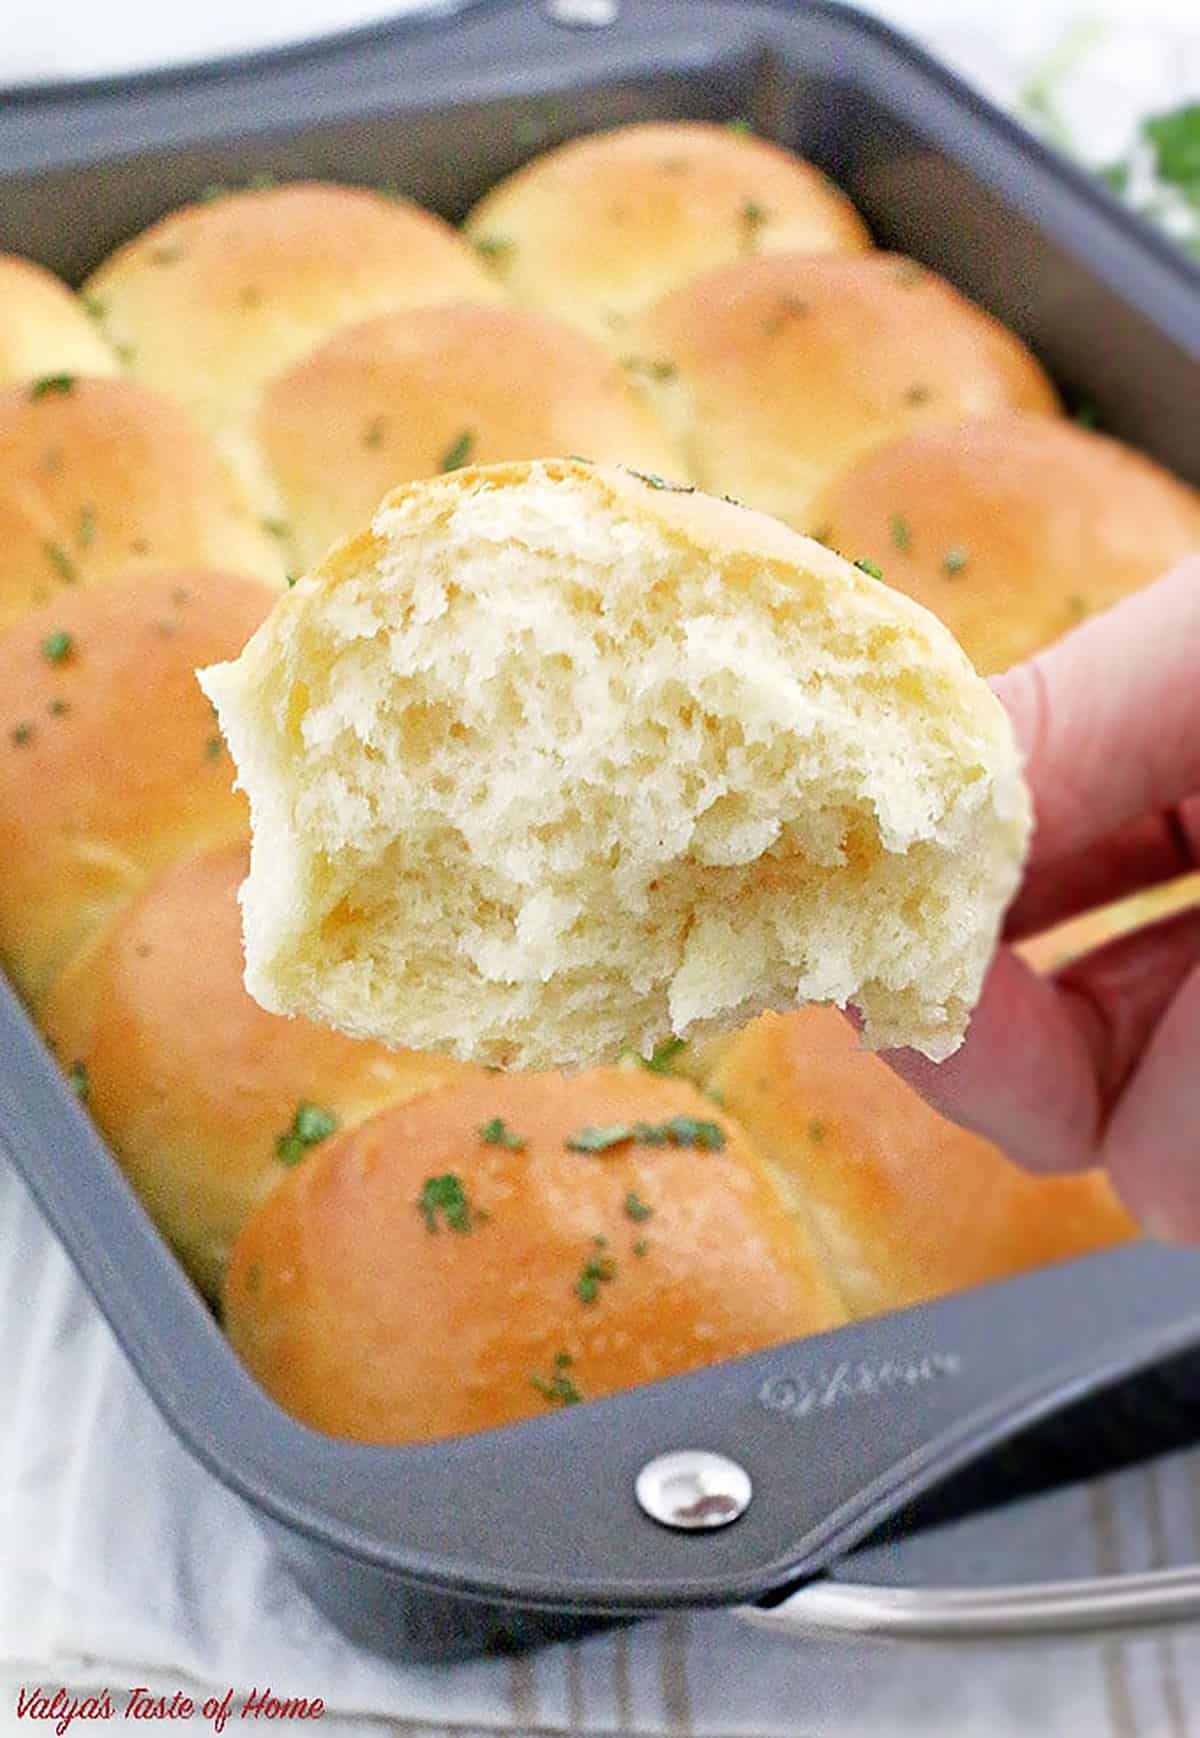 What’s best is that they’re also incredibly versatile! Have them by themselves, cut them in half and toast them with some butter on top, use some leftovers for sliders the next day after Thanksgiving, etc.